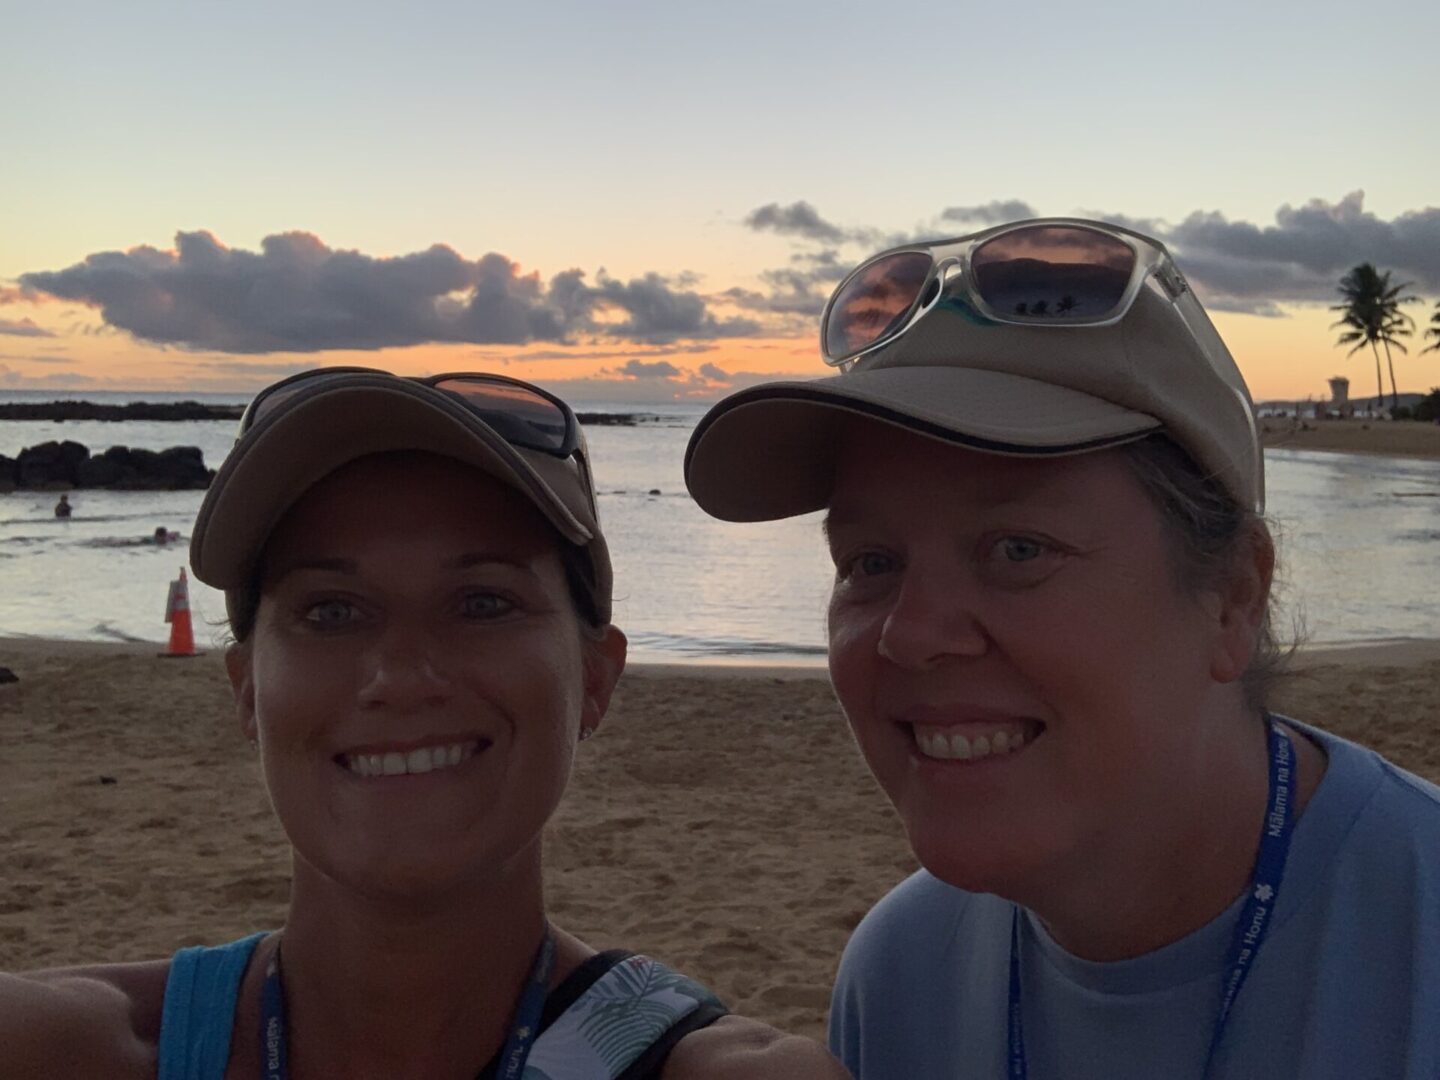 Selfie of two women looking at camera at beach